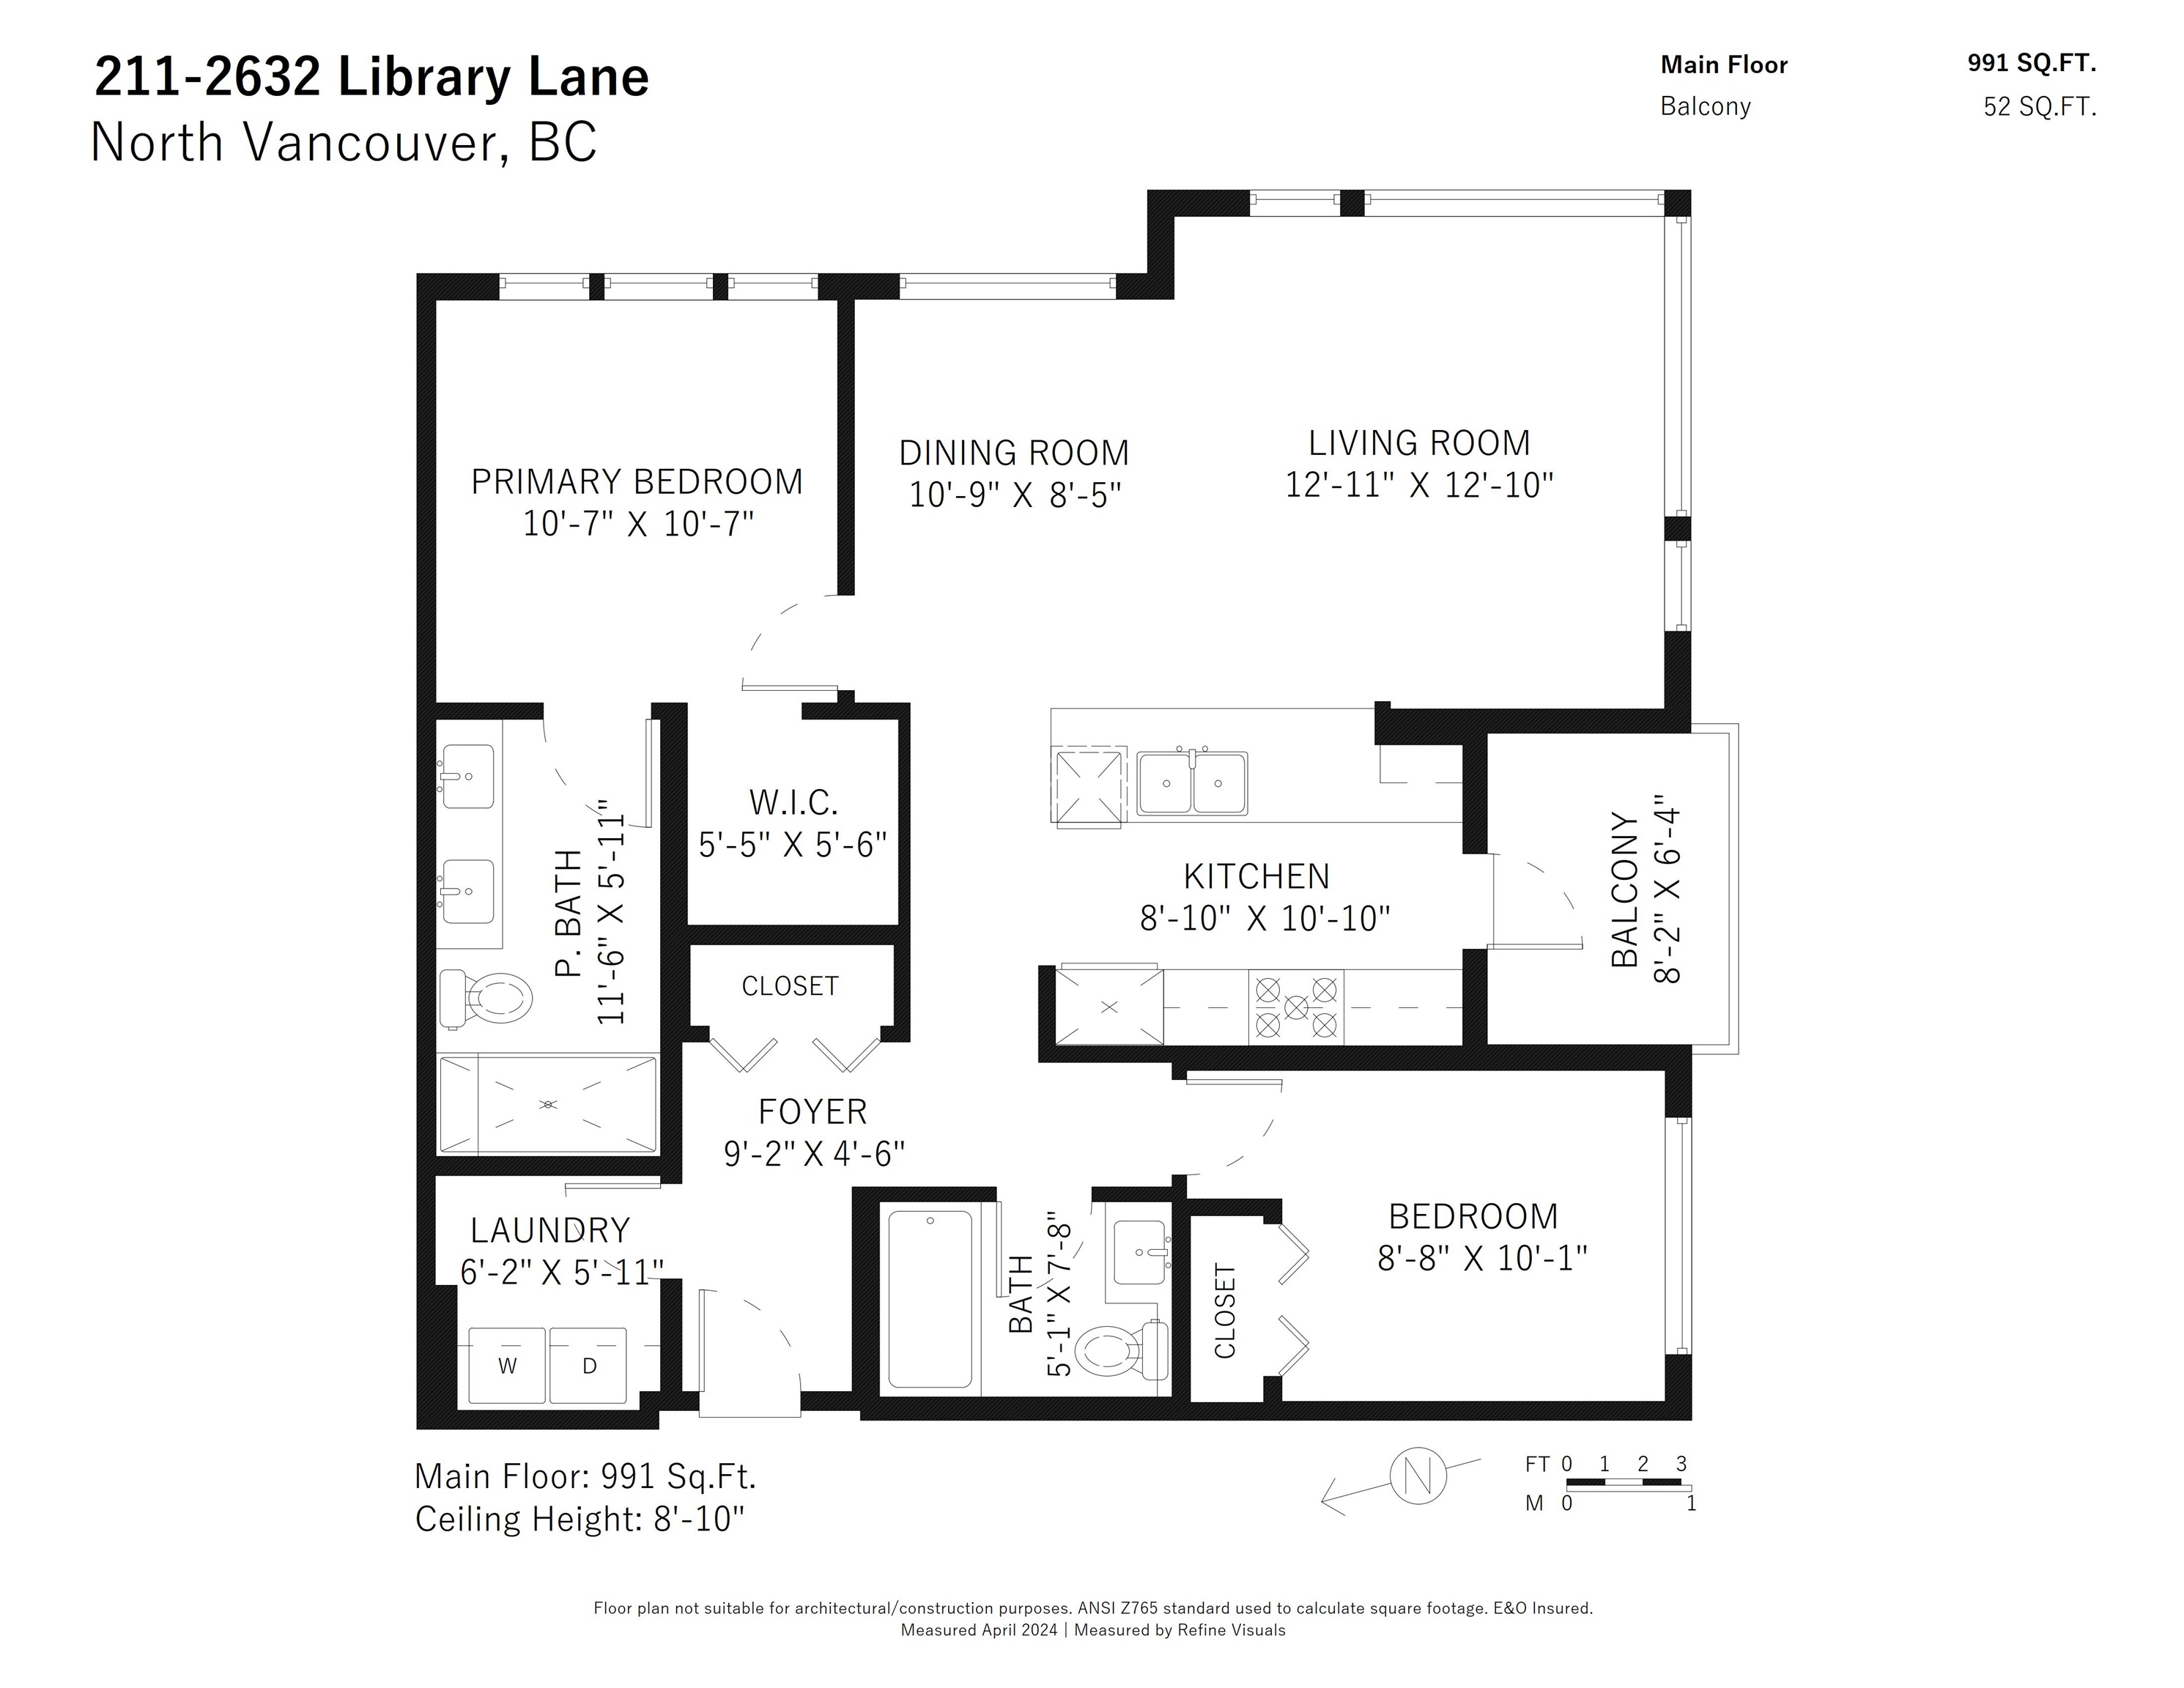 Listing image of 211 2632 LIBRARY LANE